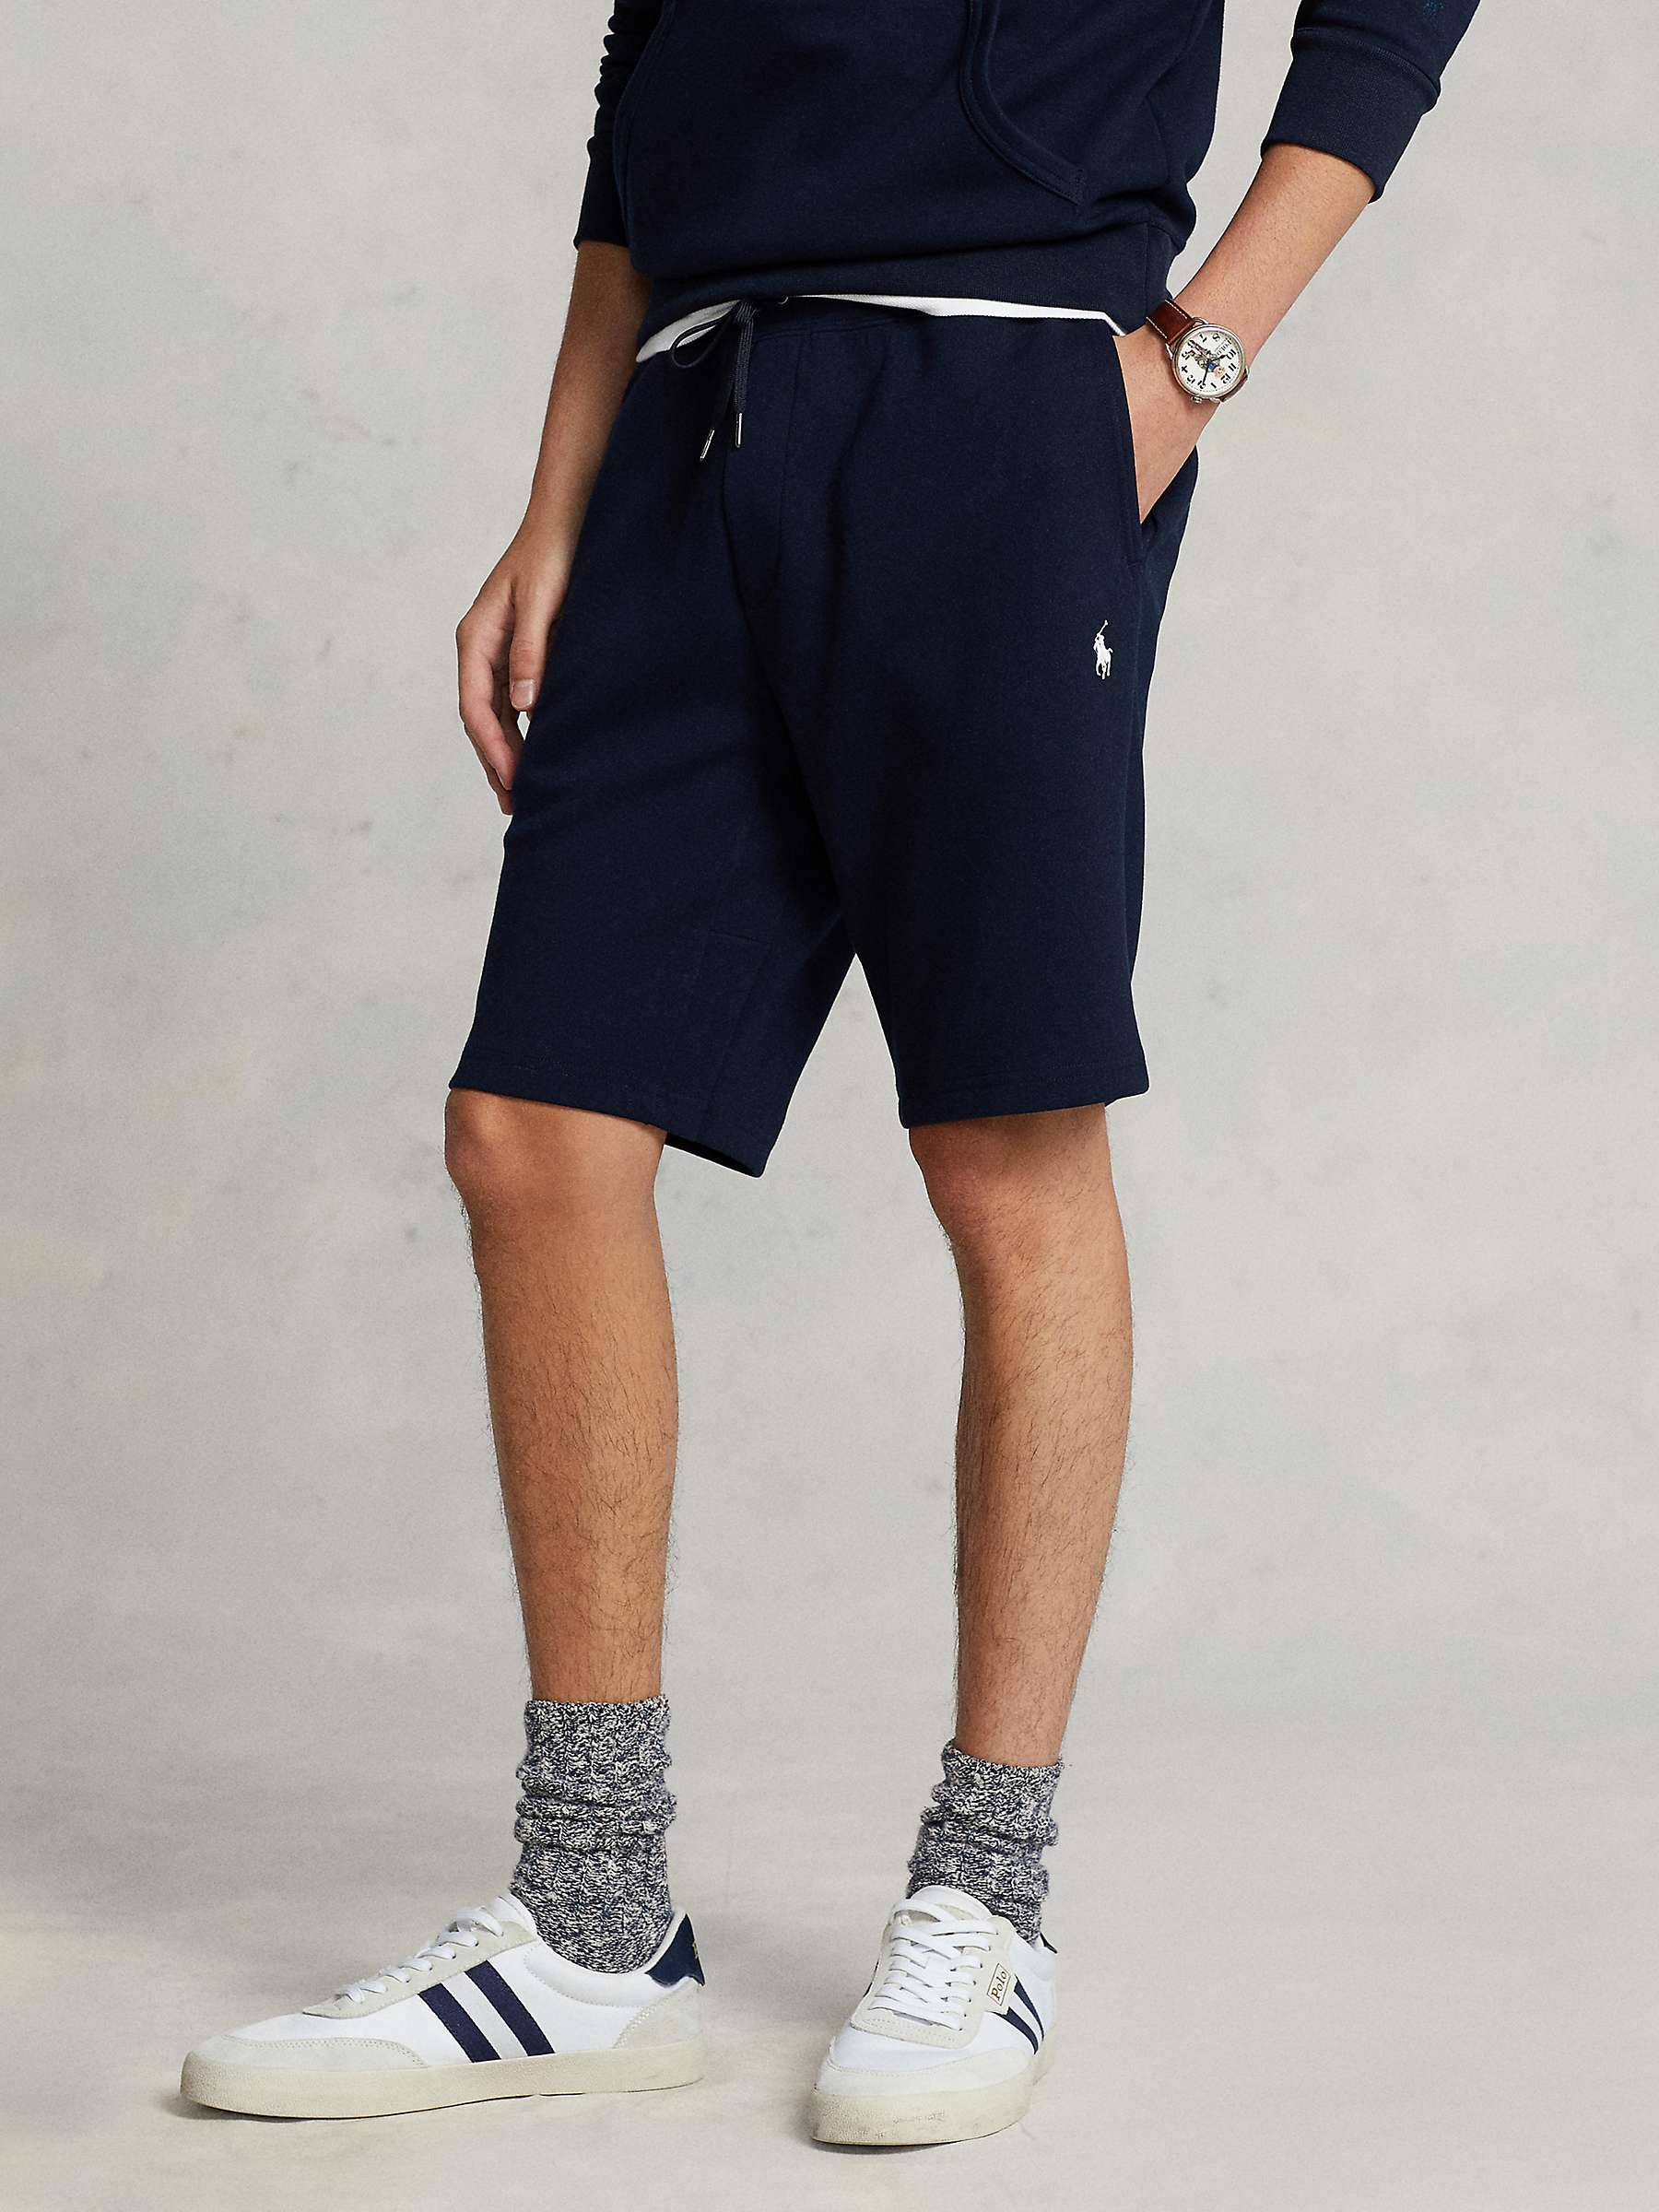 Buy Polo Ralph Lauren Double Knit Shorts, Aviator Navy Online at johnlewis.com